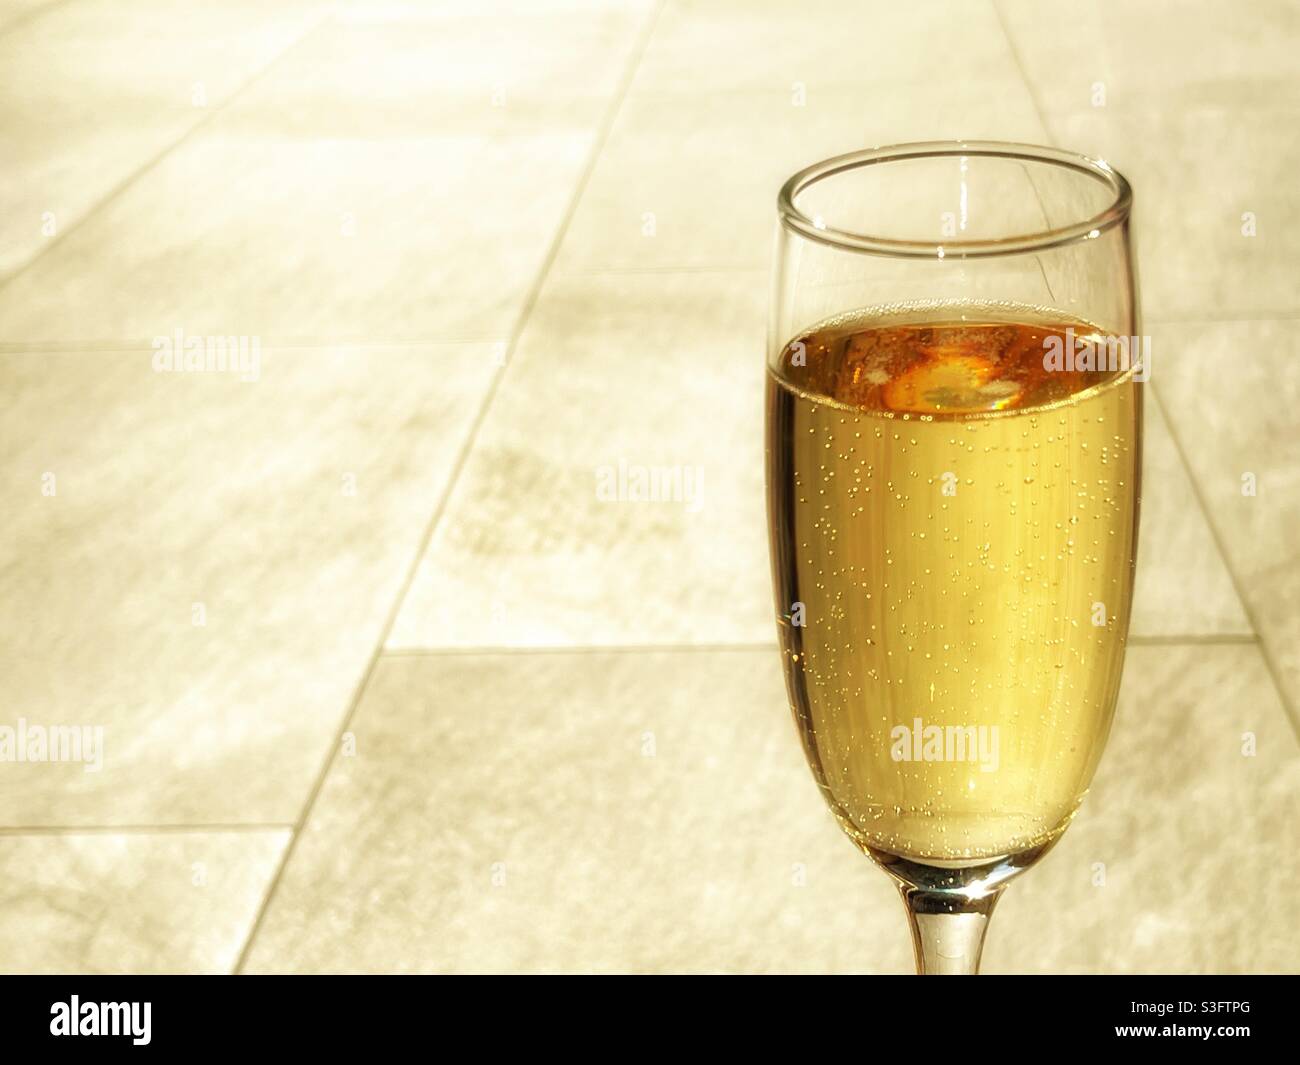 Flute glass of chilled champagne isolated against a plain background. No people. Stock Photo